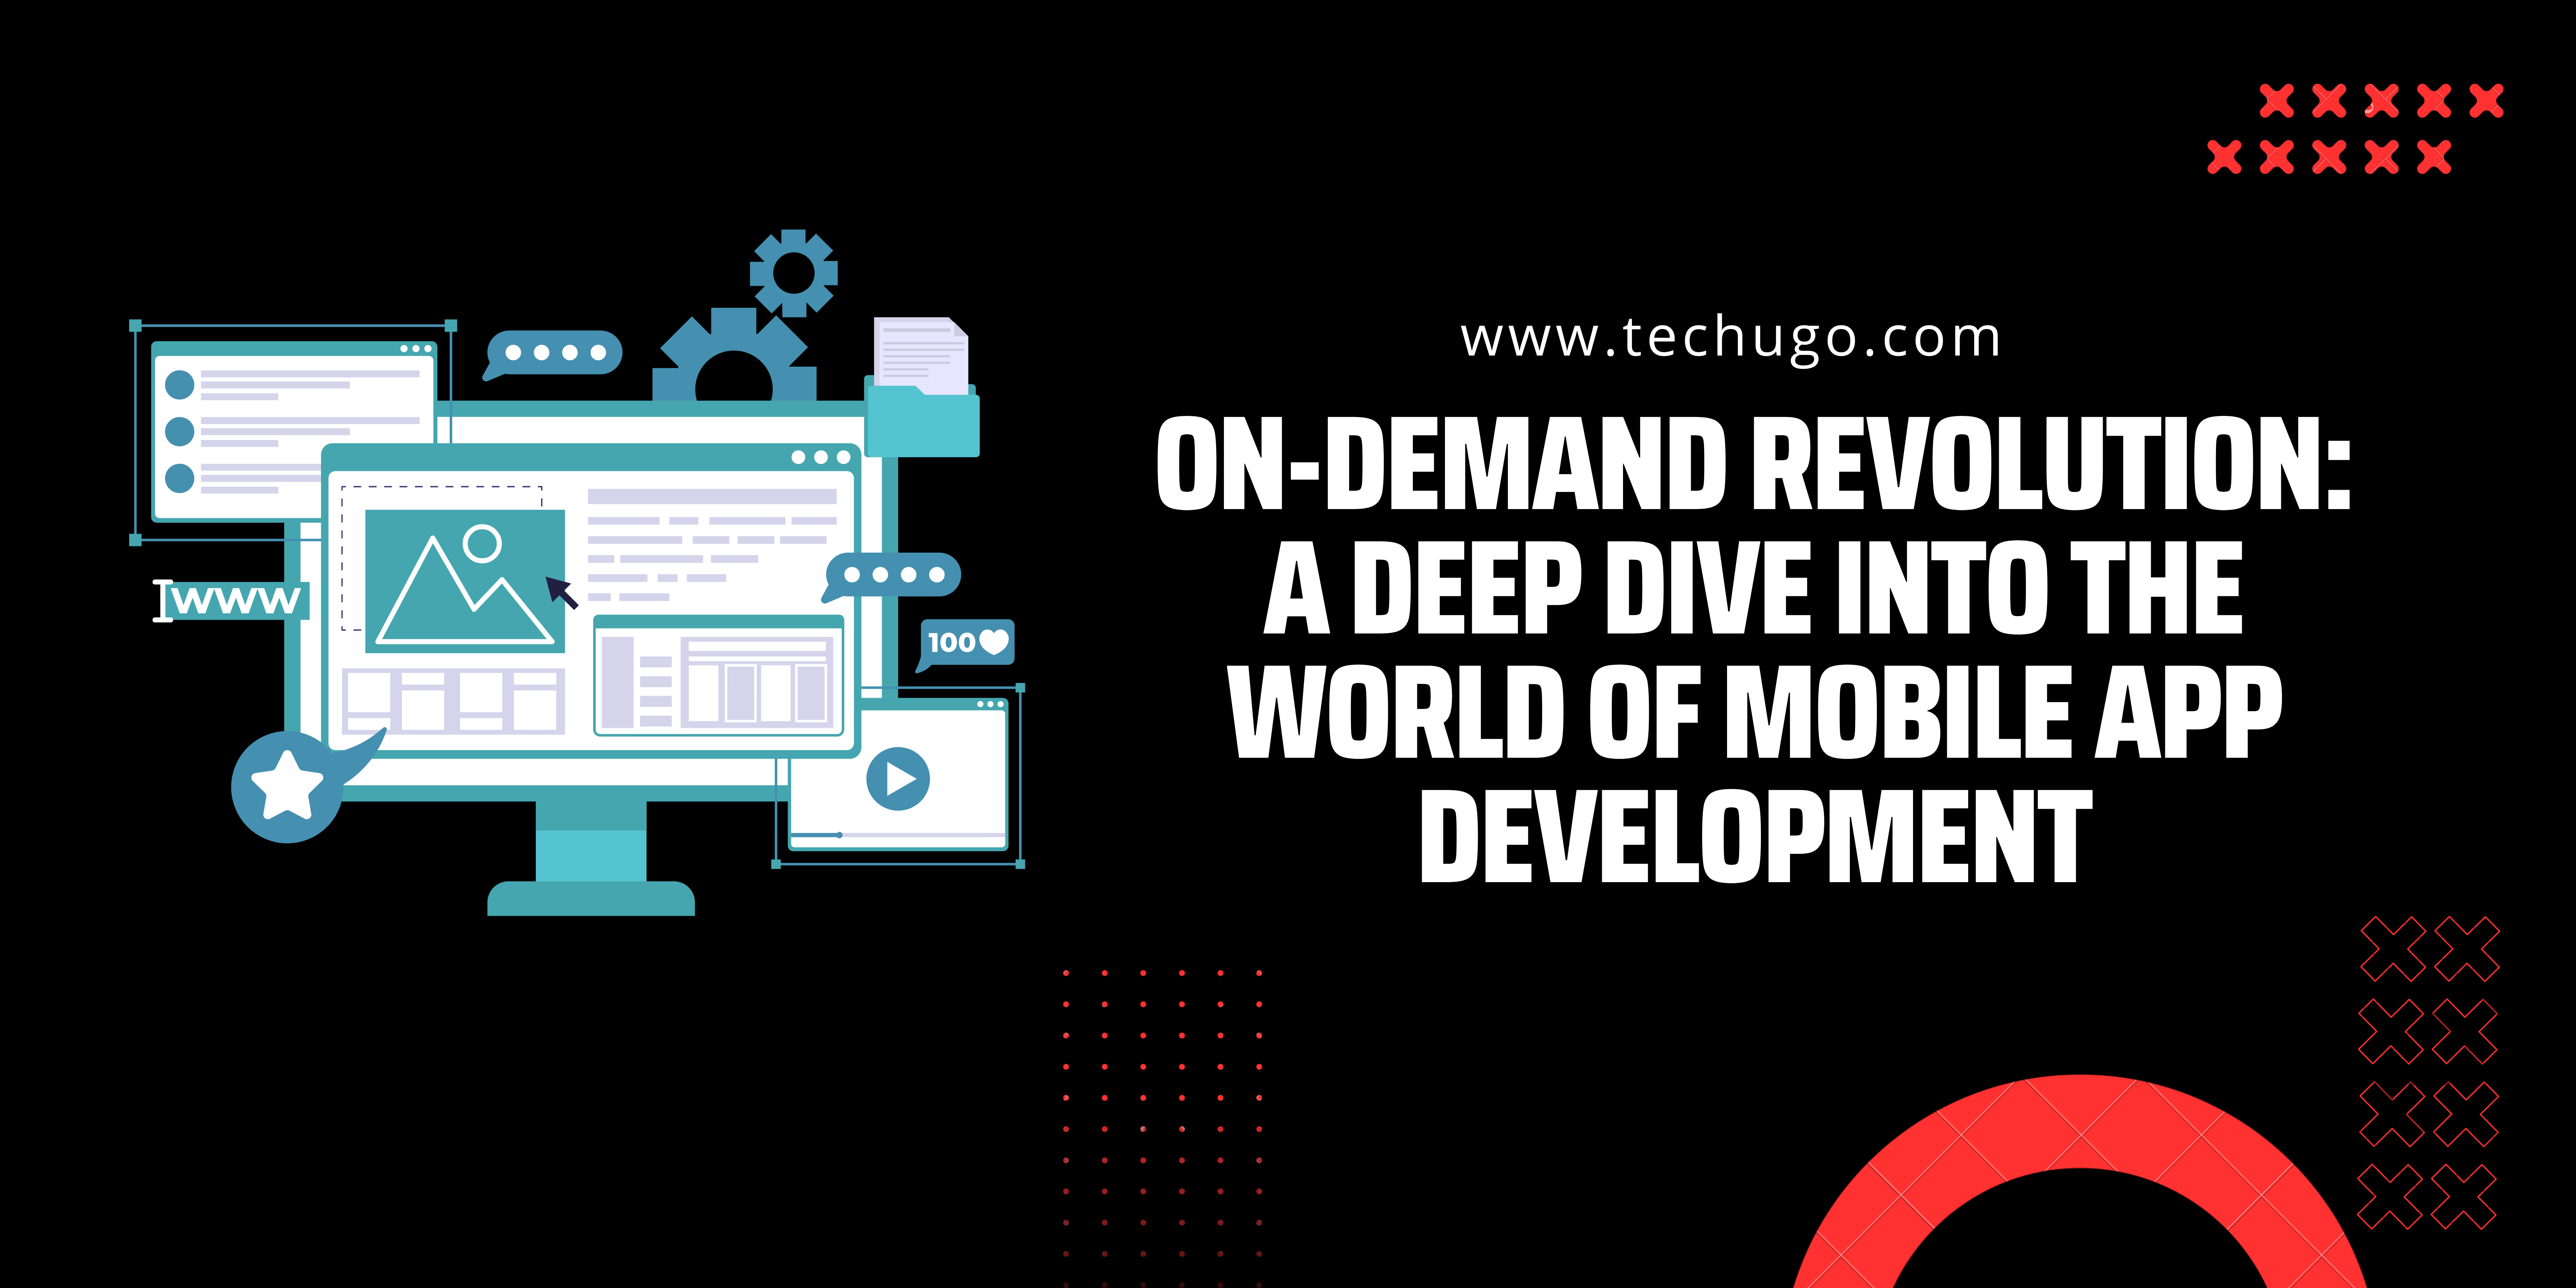 On-Demand Revolution: A Deep Dive into the World of Mobile App Development